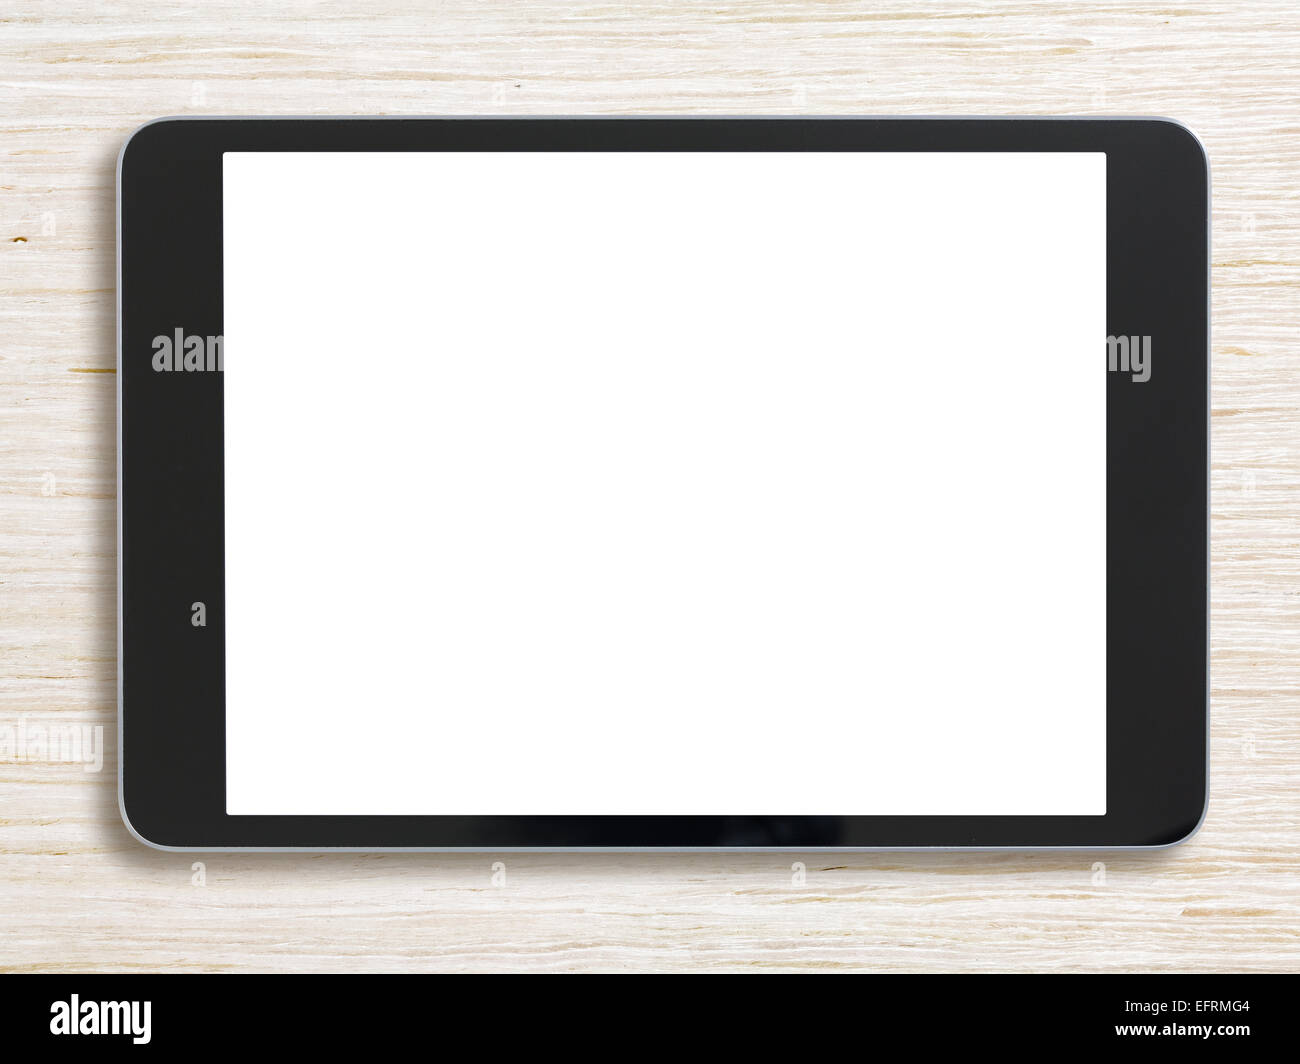 Black tablet pc on bleached wood background Stock Photo